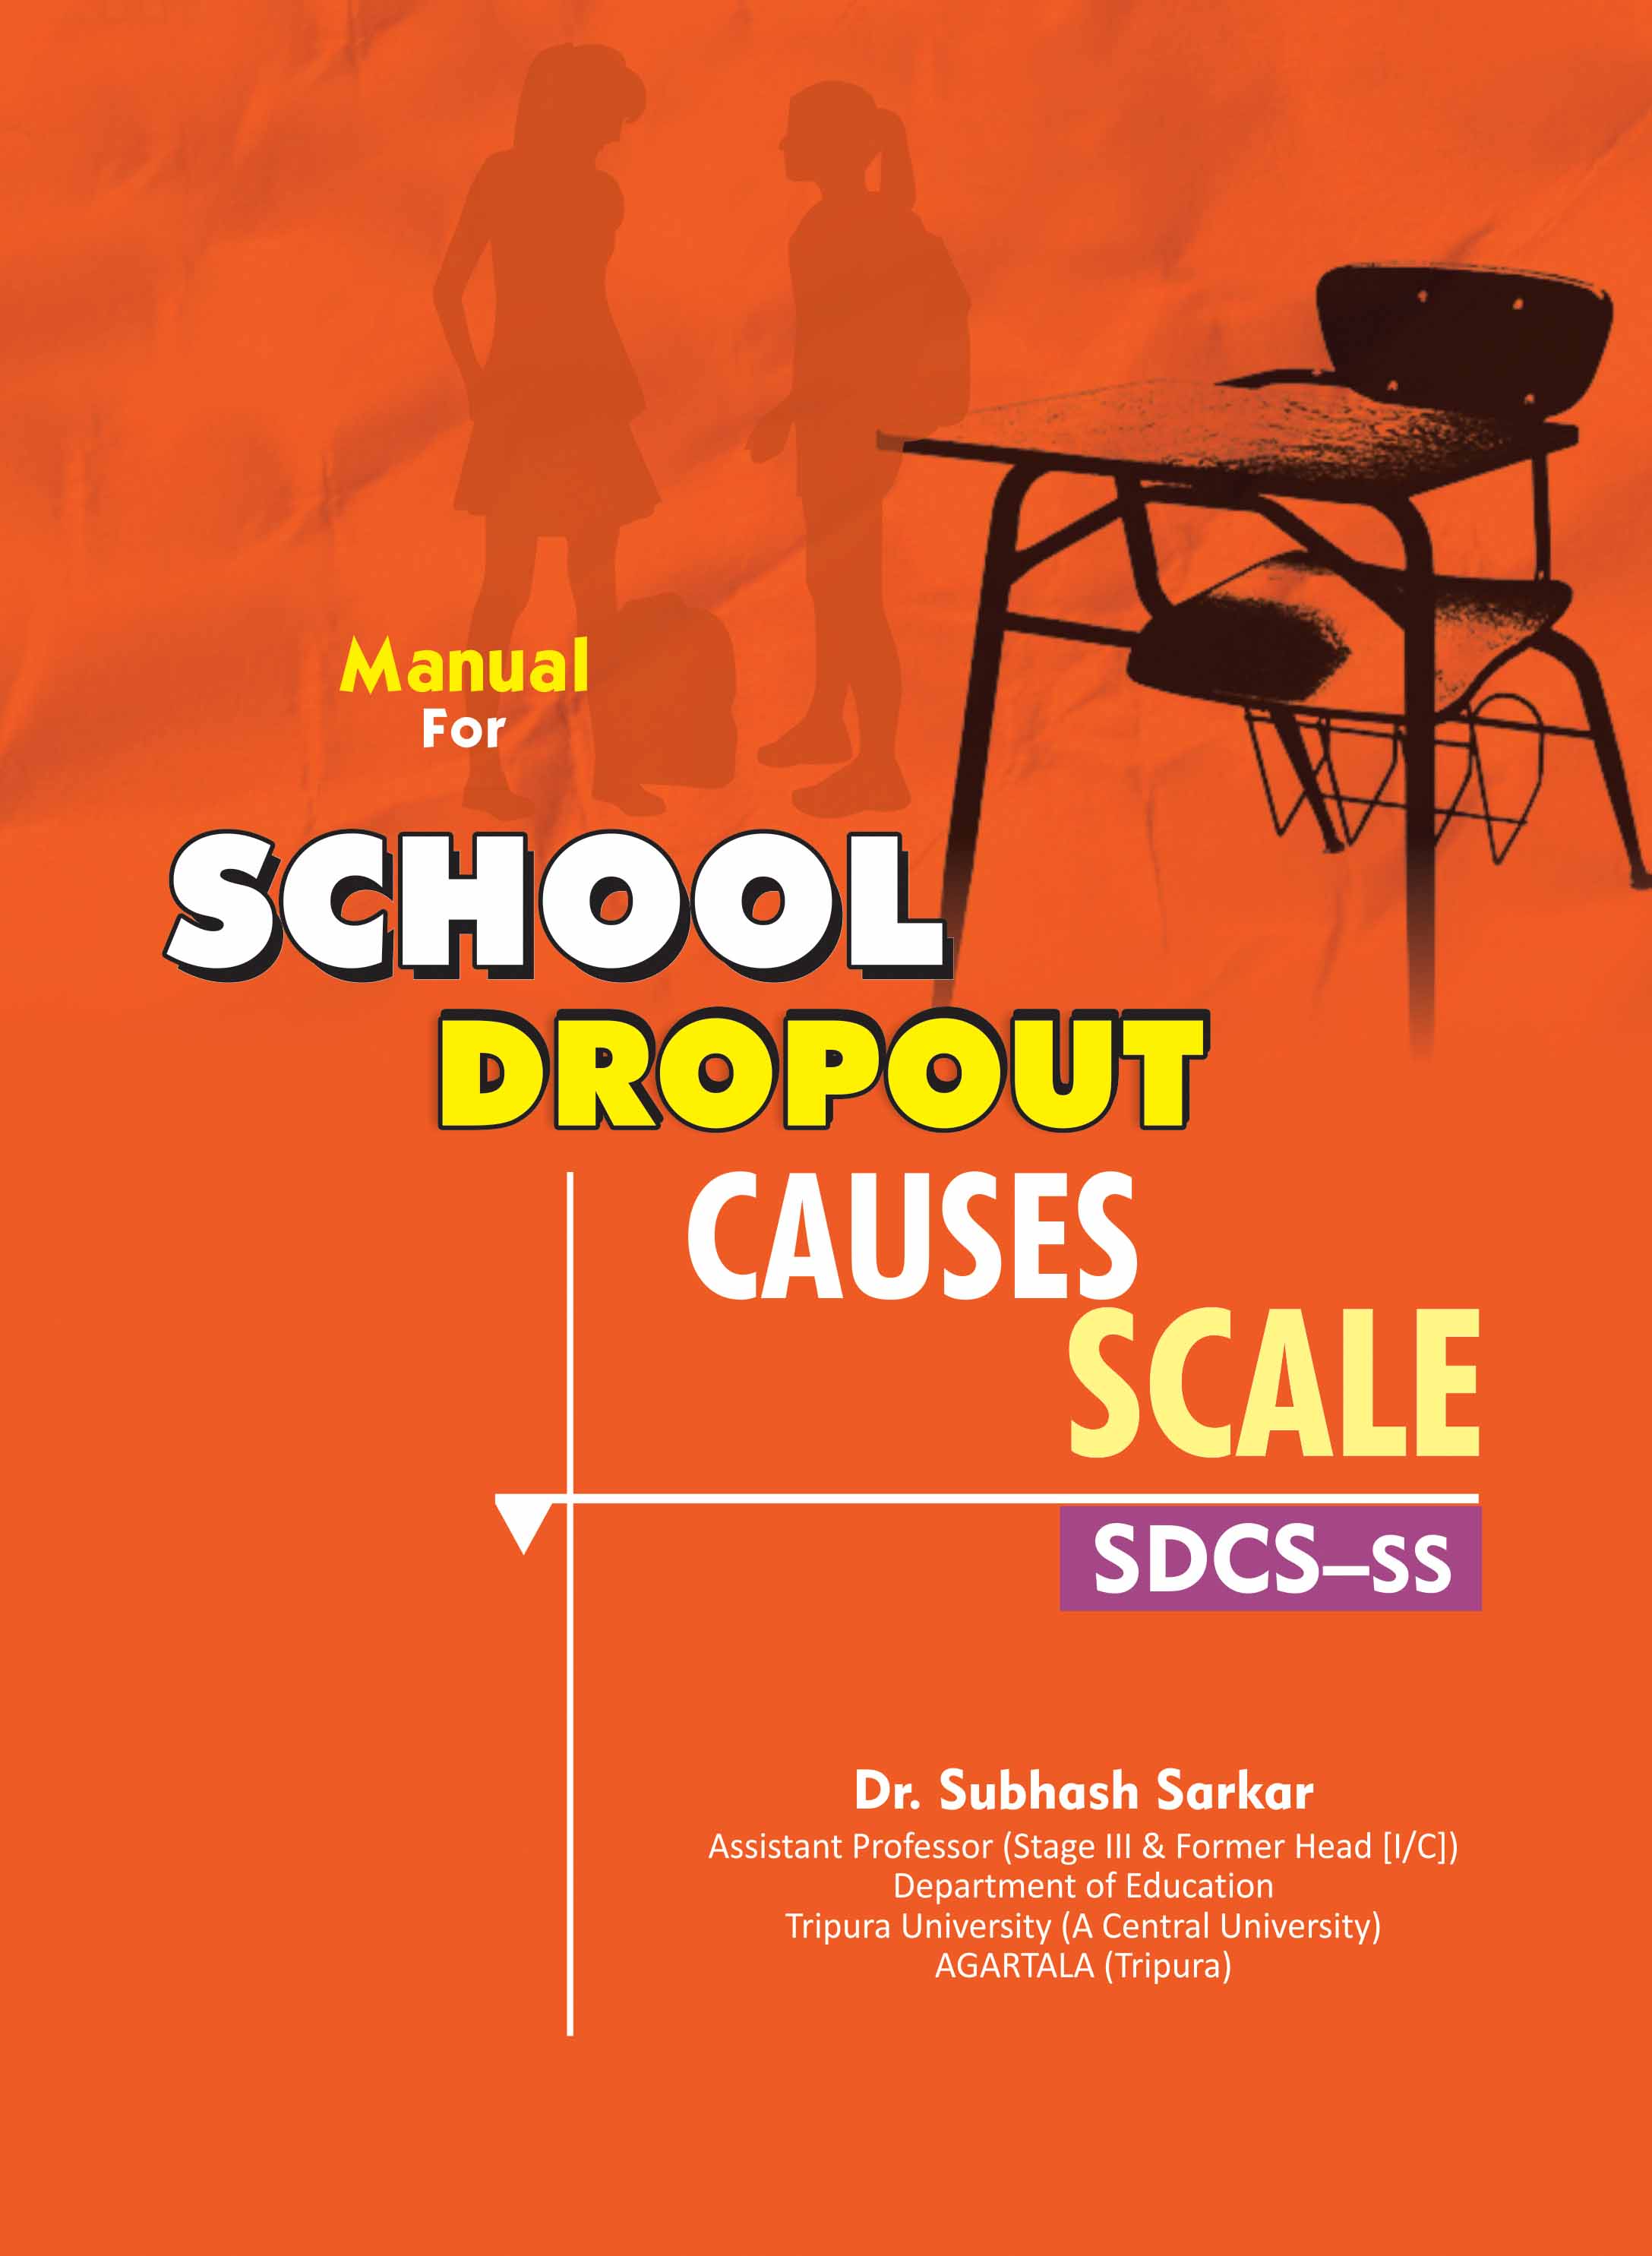 SCHOOL-DROPOUT-CAUSES-SCALE